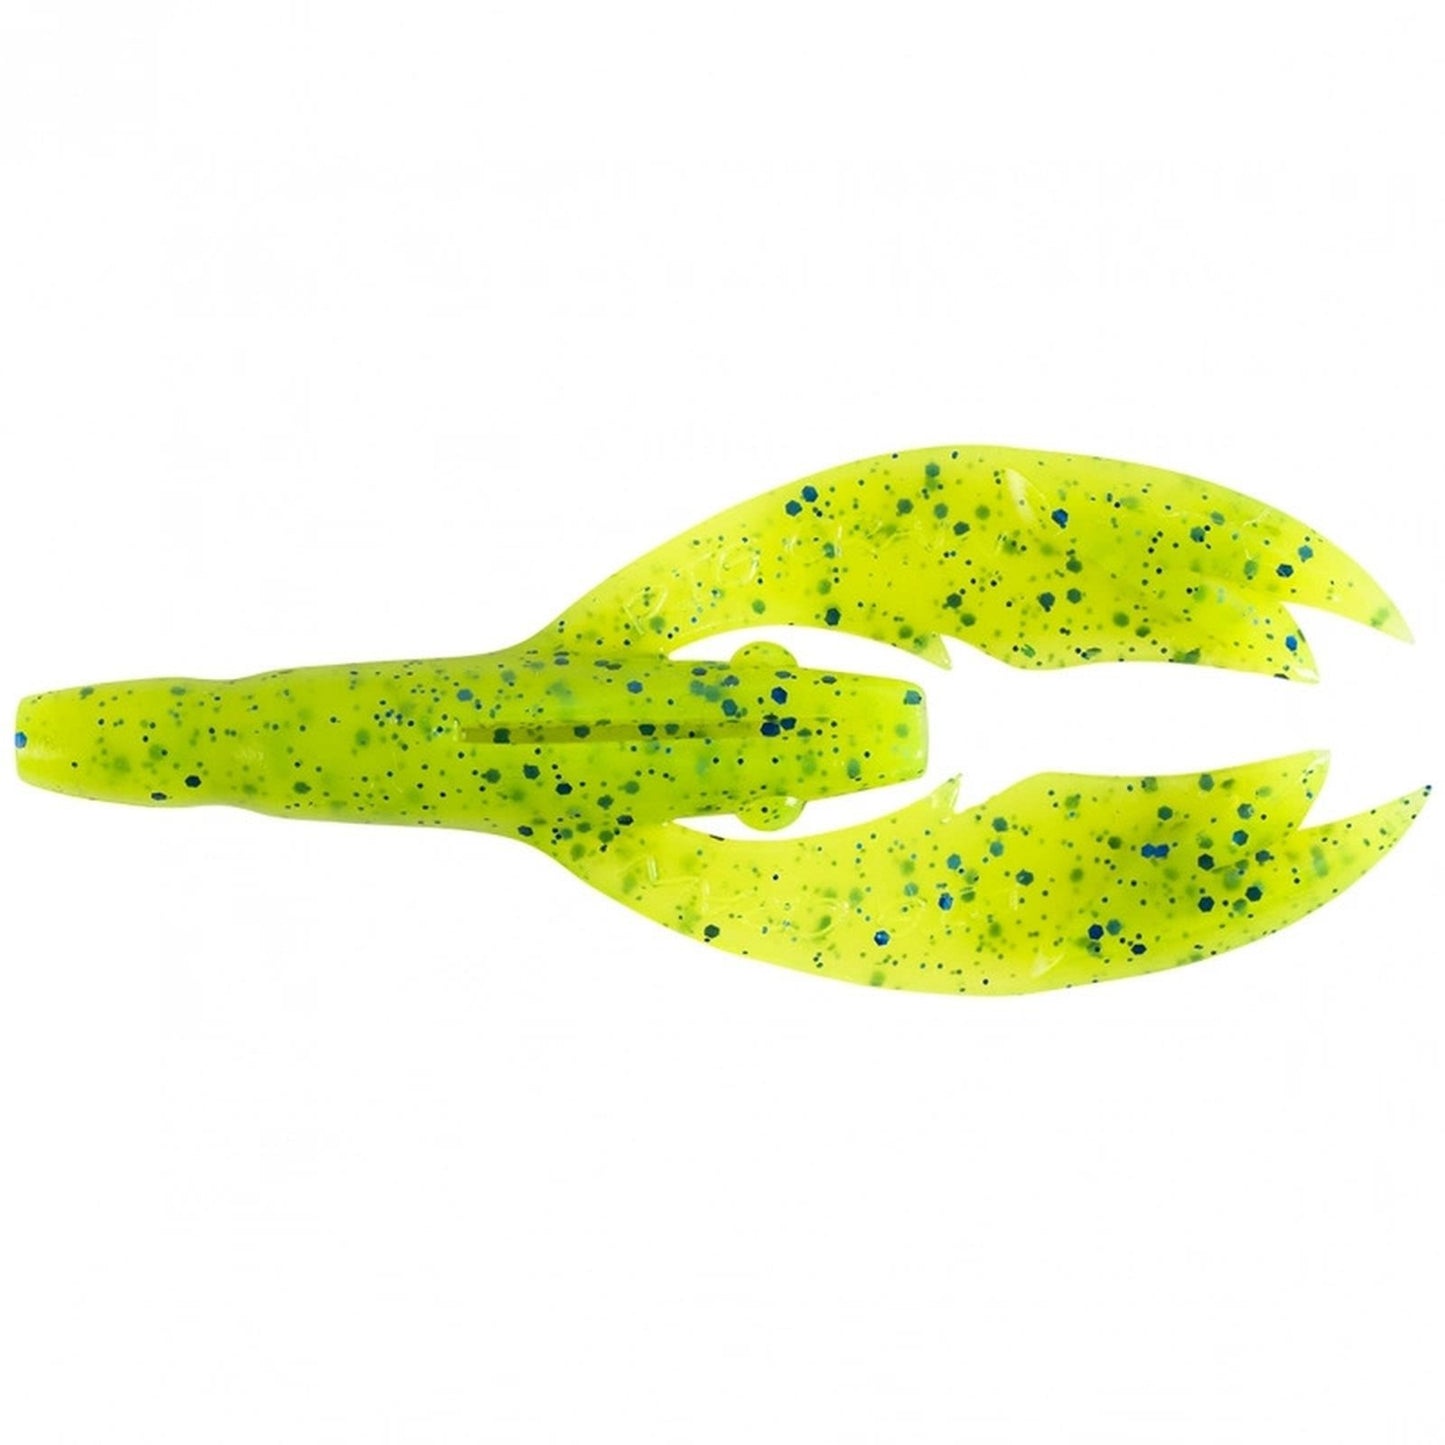 Strike Pro CWC Pig Craw C024 Funky Lime